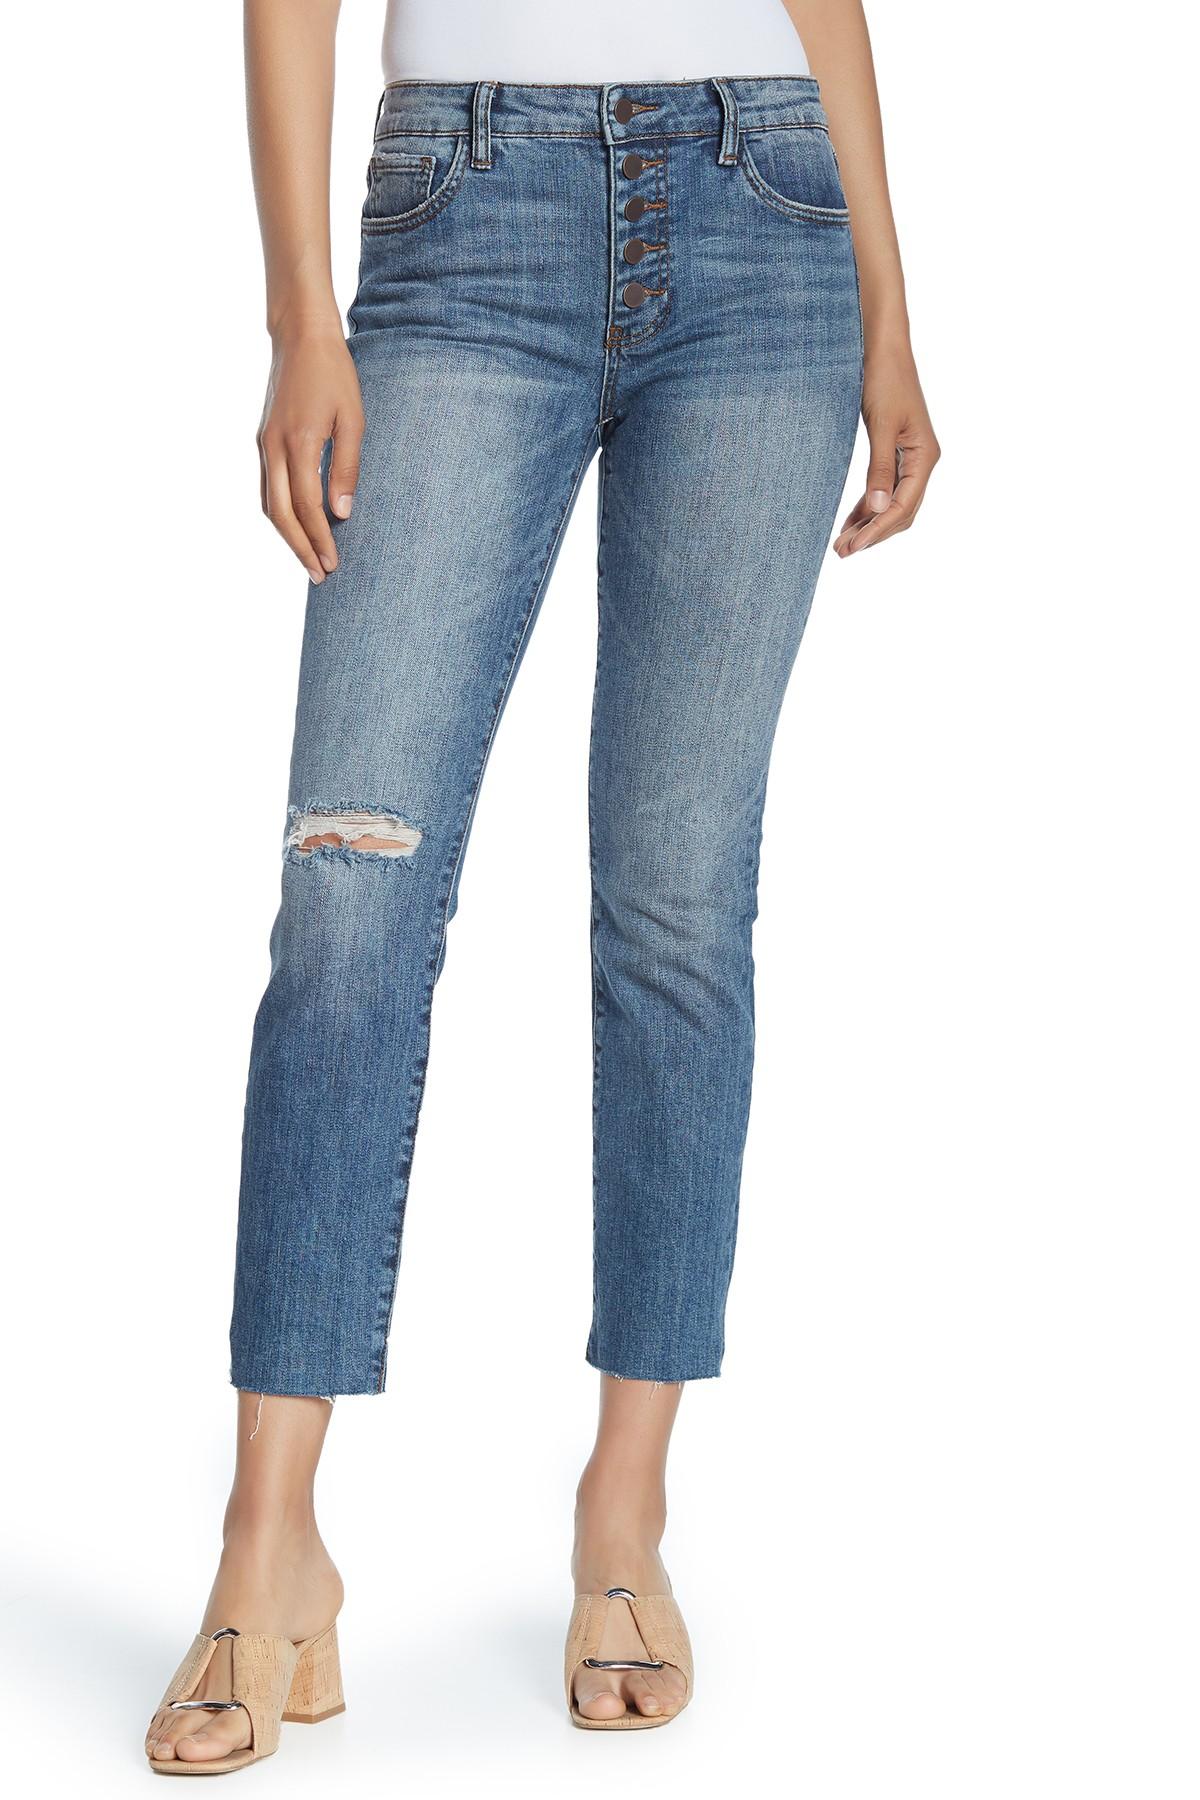 Kut From The Kloth Reese Distressed Raw Hem Straight Ankle Jeans in ...